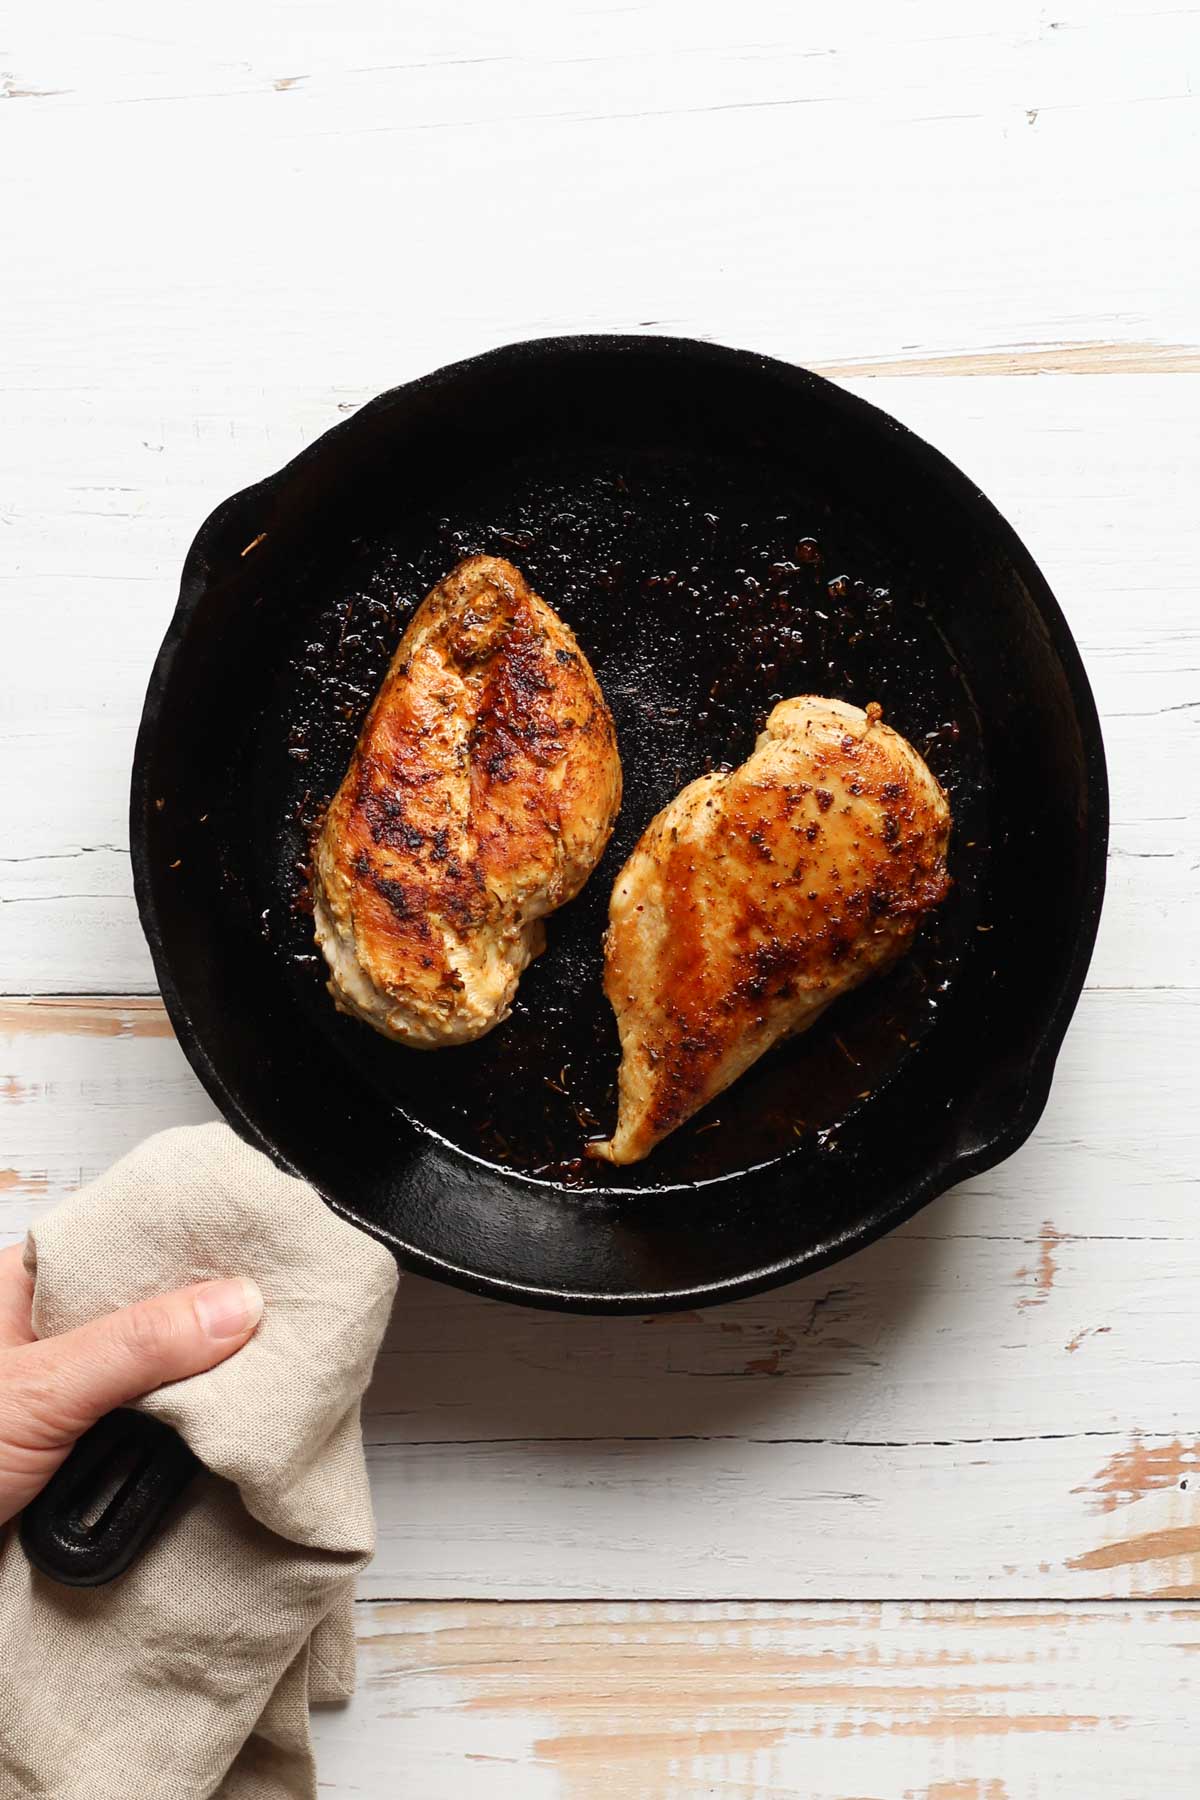 Sauteed chicken breasts in a cast iron skillet